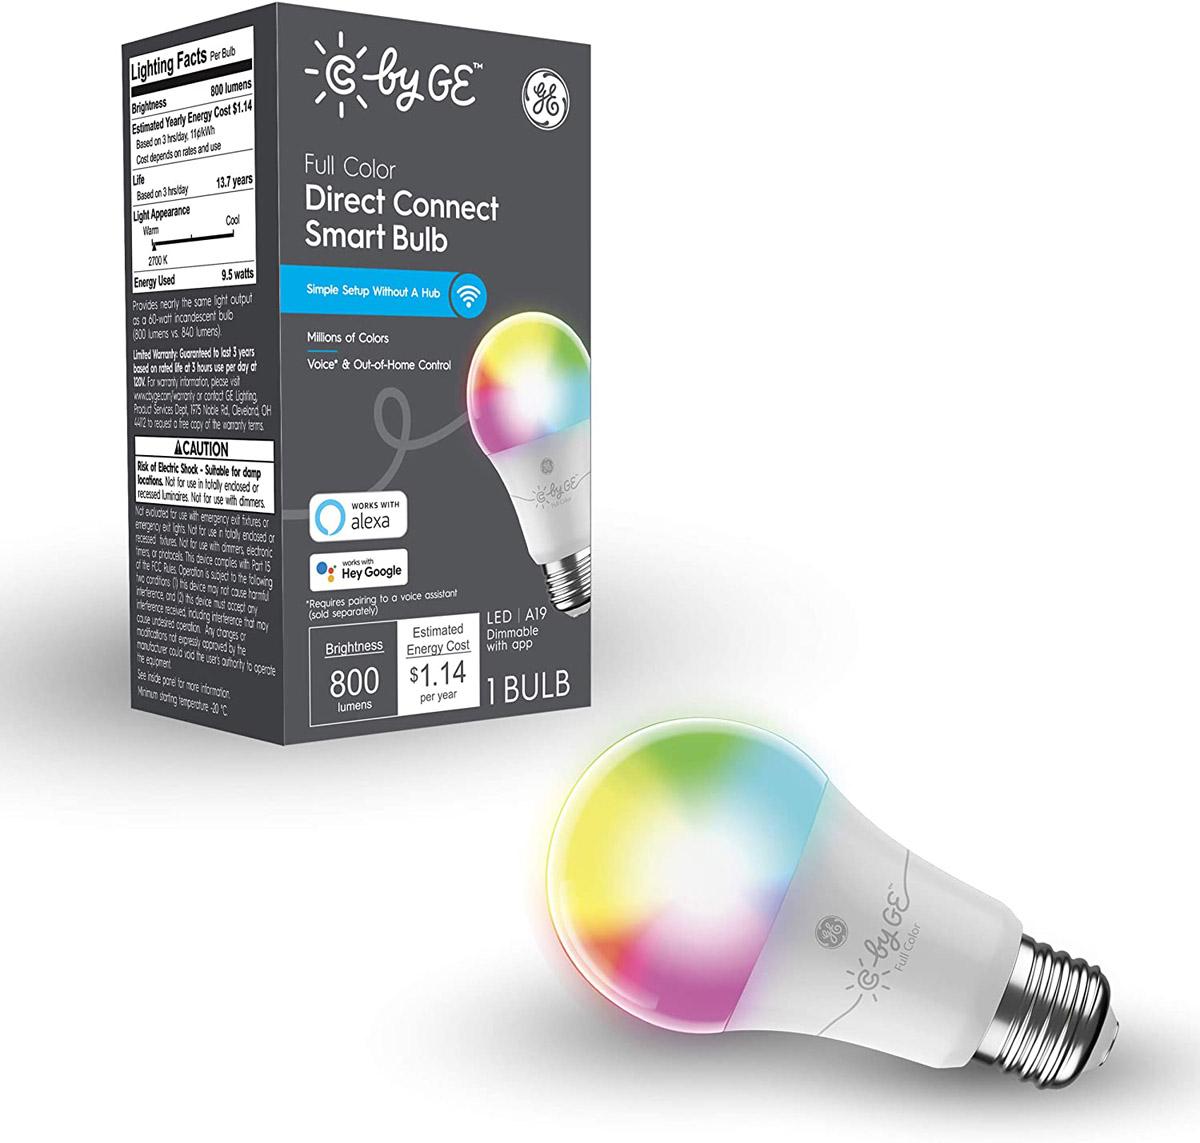 C by GE Full Color Direct Connect Smart LED Bulb for $13.99